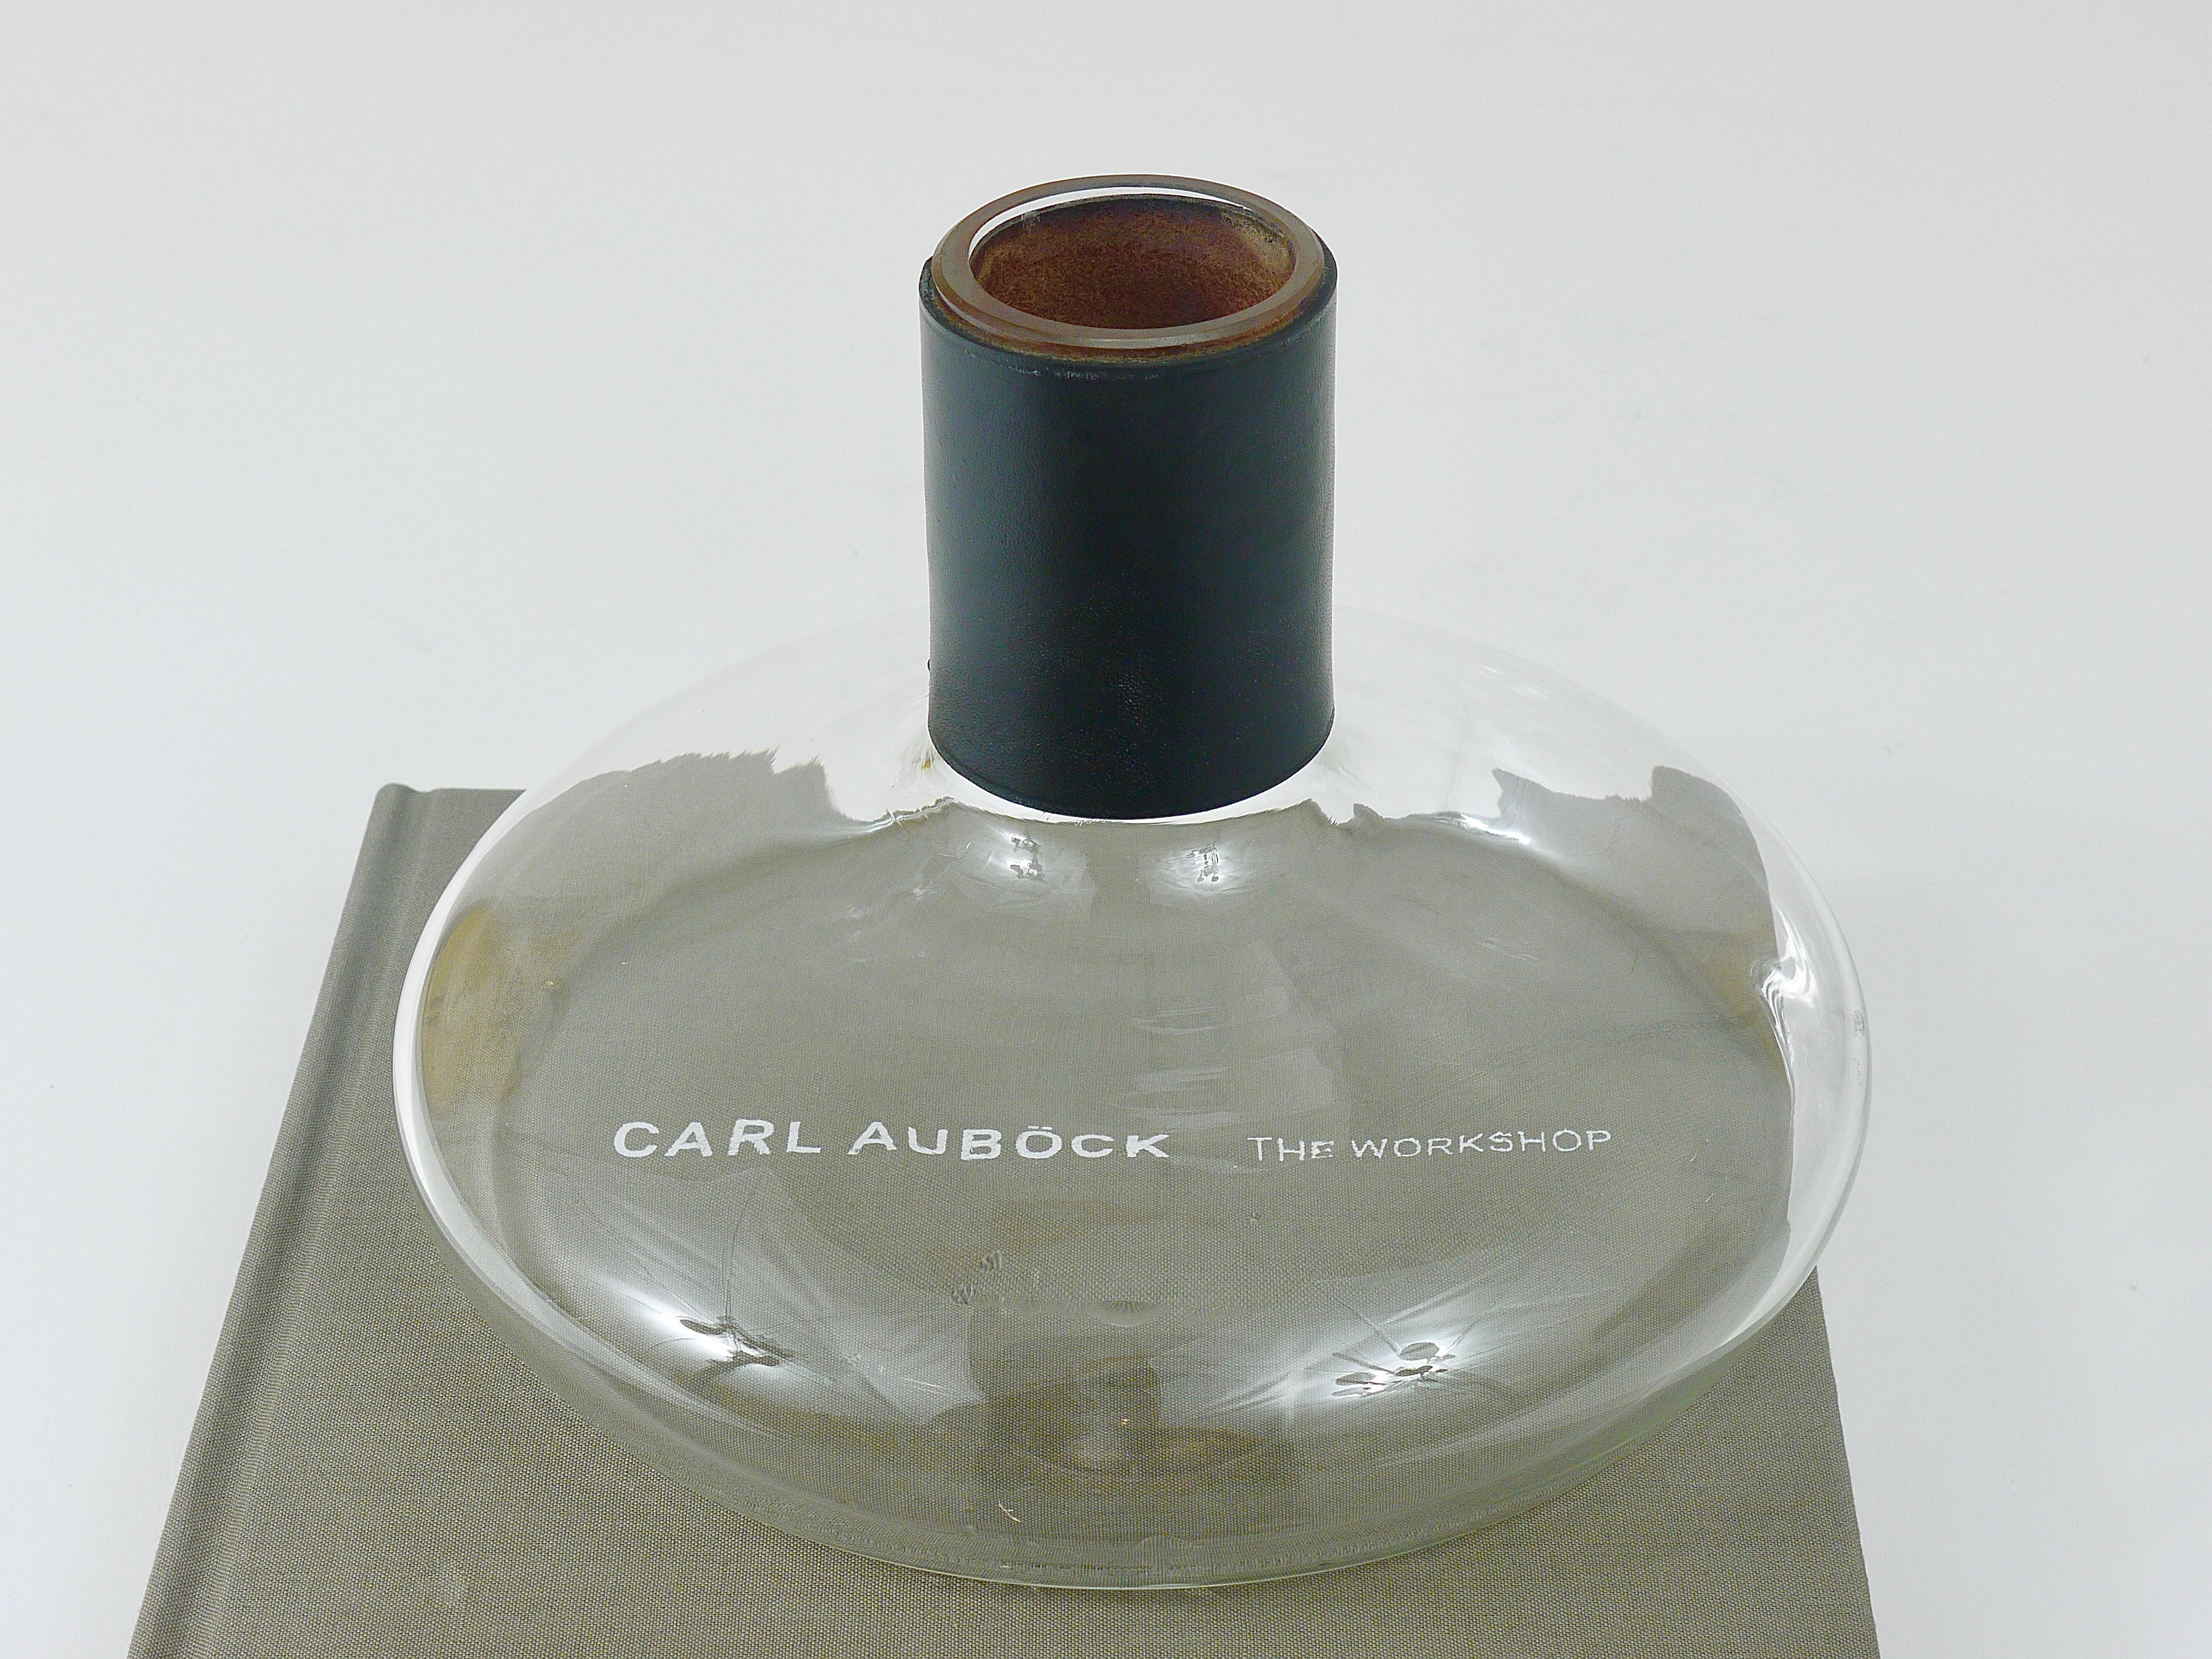 Austrian Carl Aubock Vase or Decanter with Black Leather Top, Midcentury, Austria, 1950s For Sale